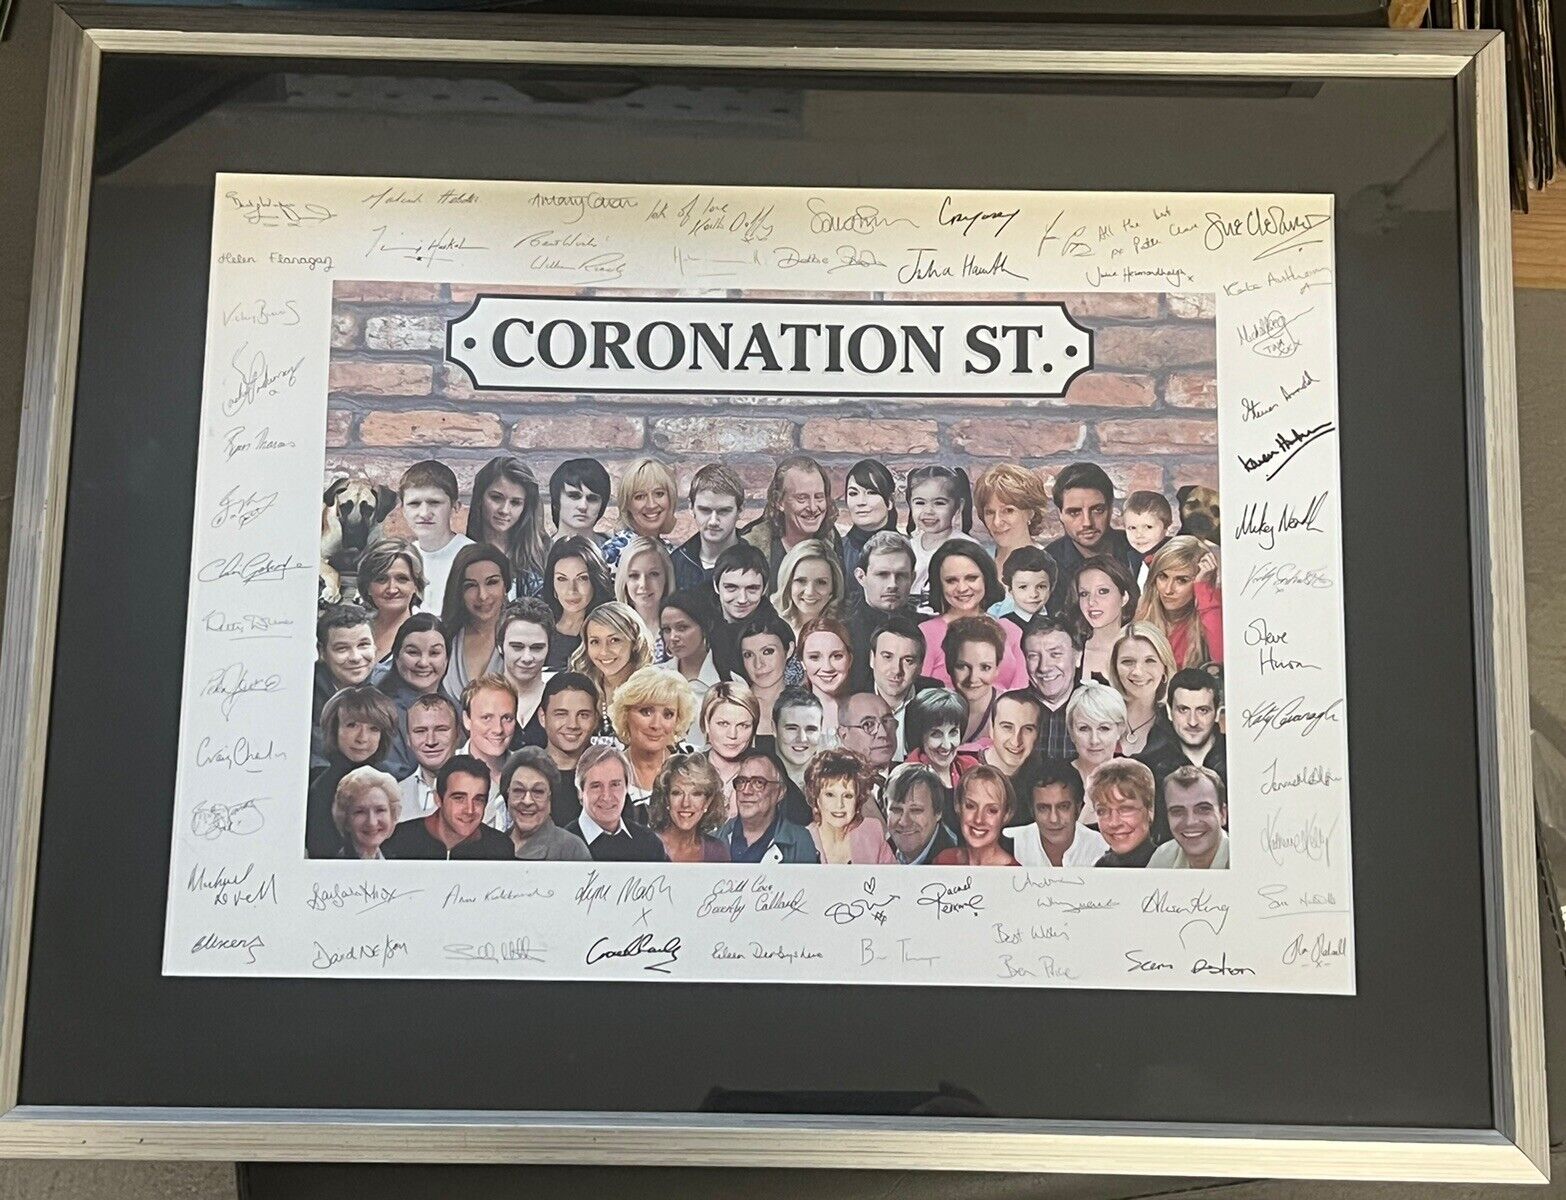 Coronation Street Framed Cast Photo 2010 Printed Autographs With Letter